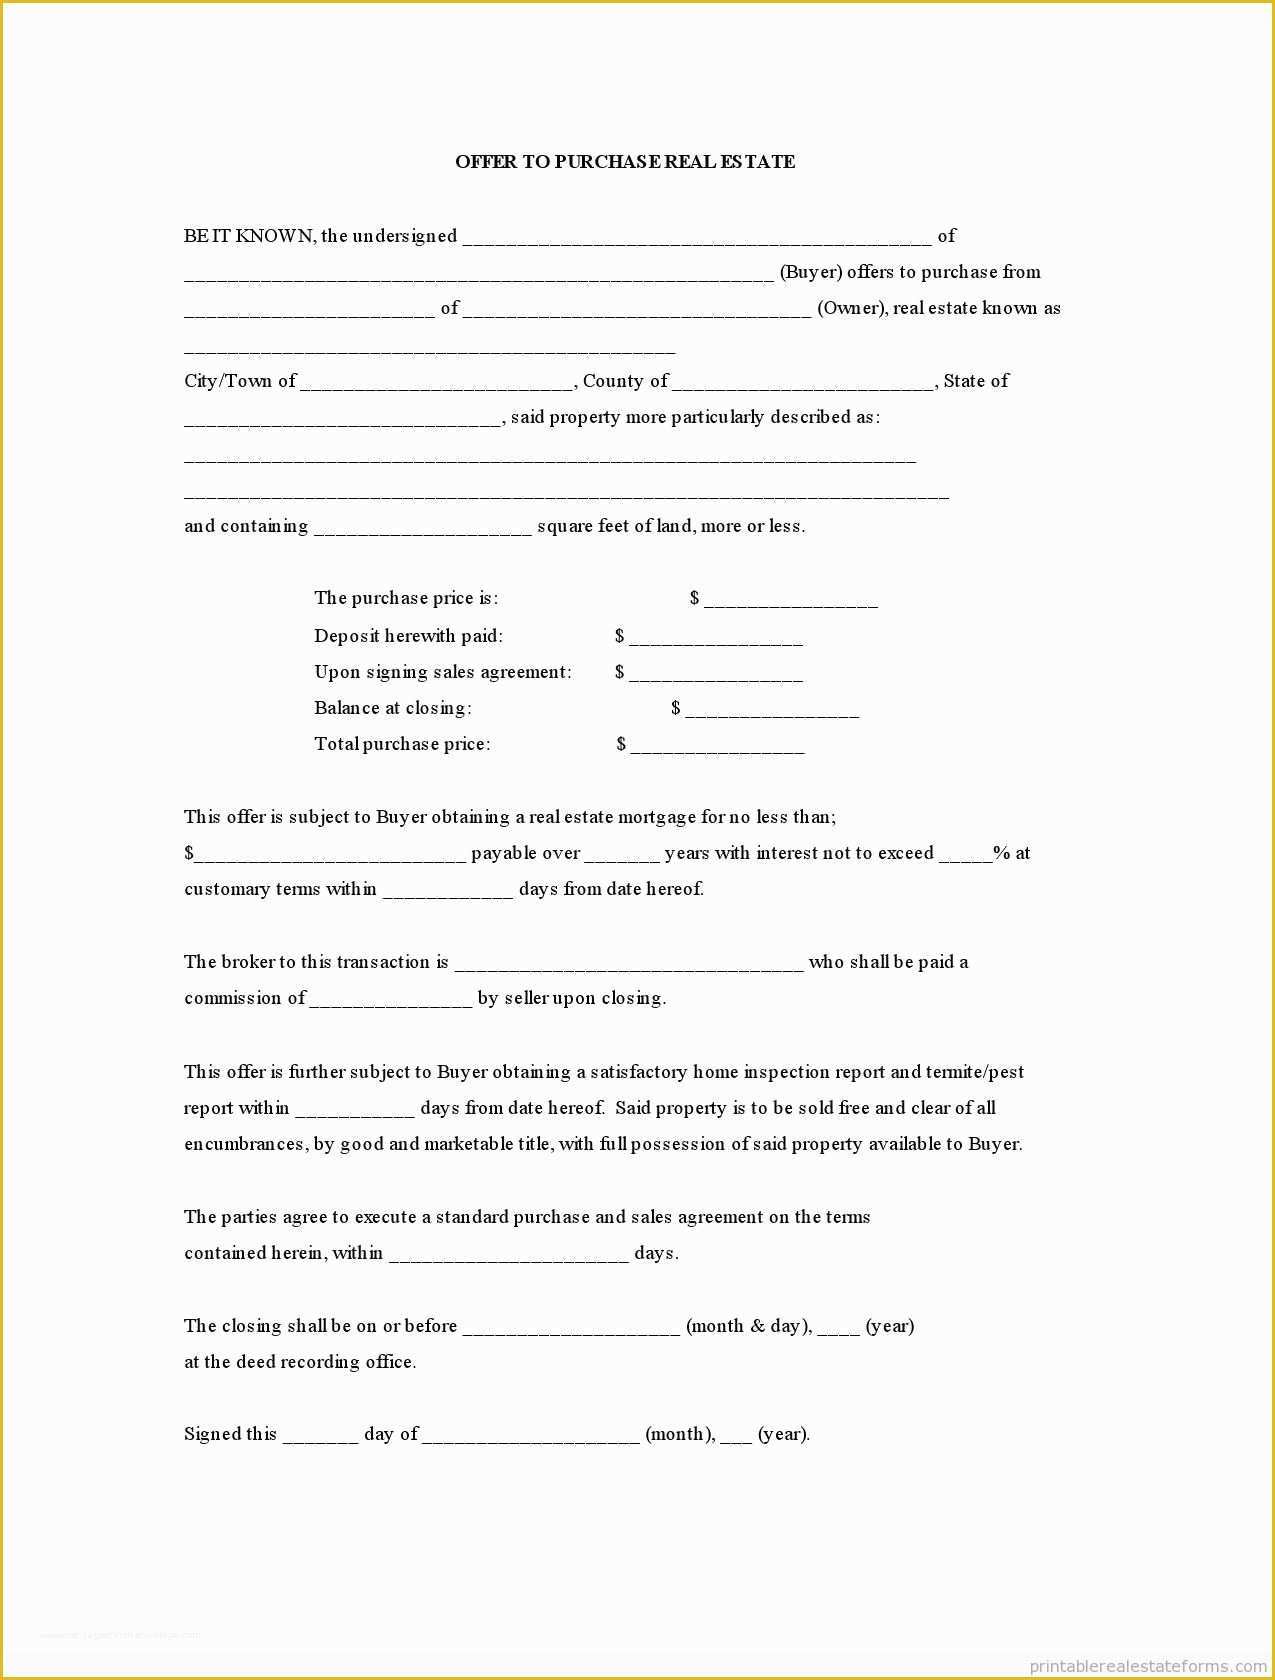 Real Estate Offer Template Free Of Printable Offer to Purchase Real Estate Template 2015